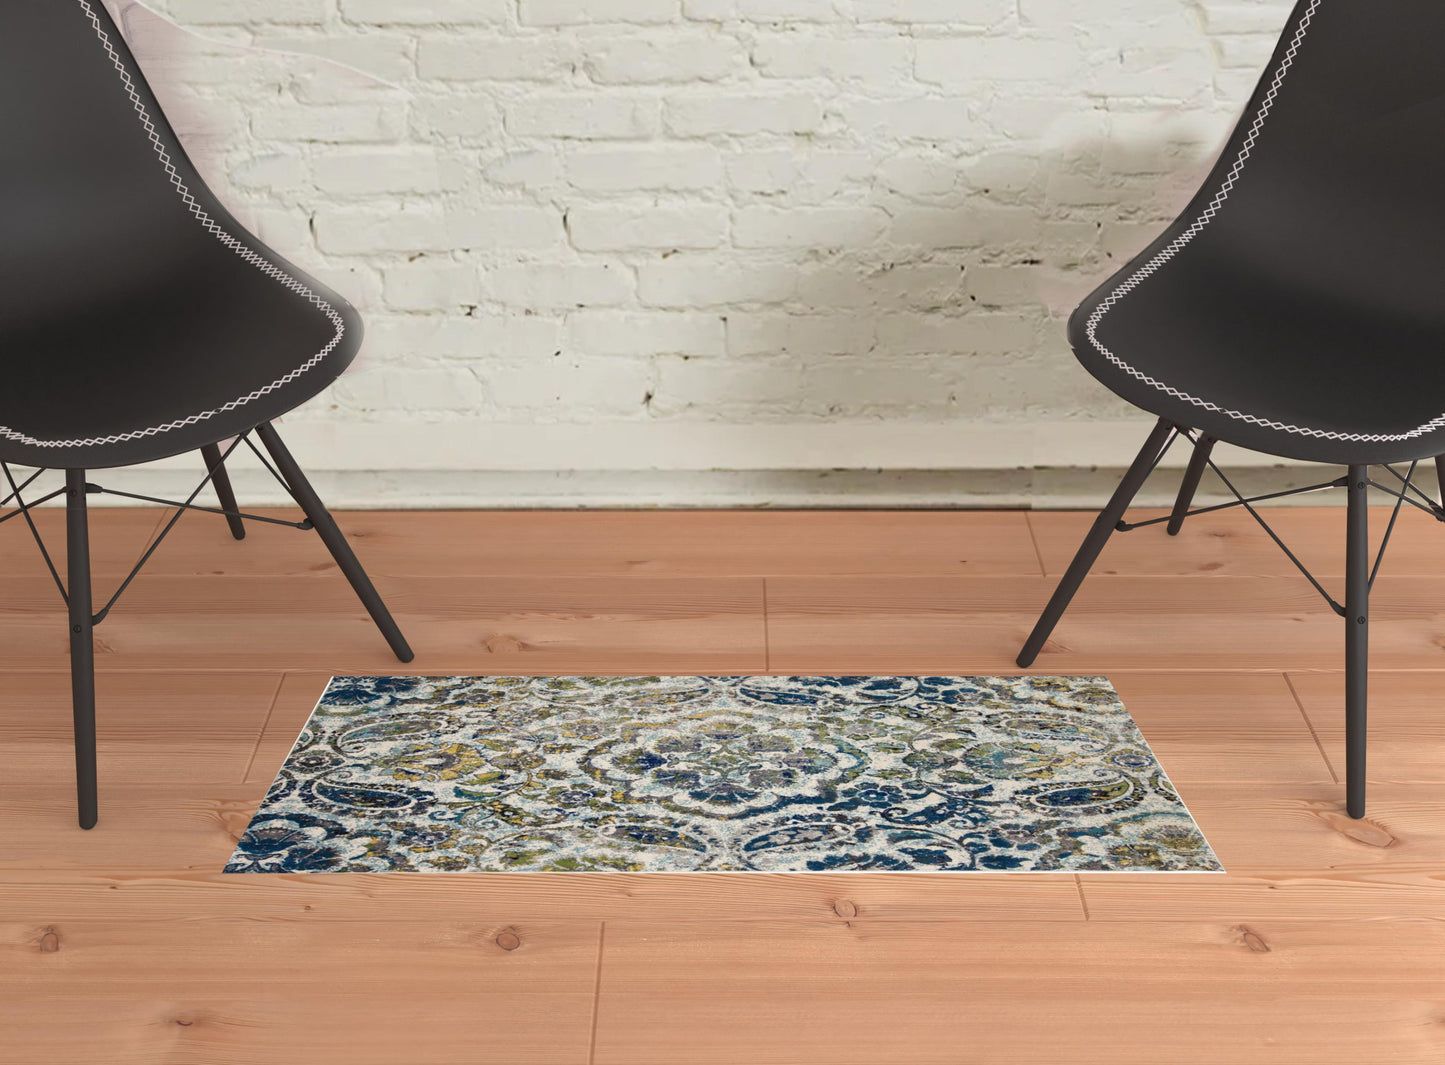 8' X 11' Ivory Blue And Green Floral Stain Resistant Area Rug